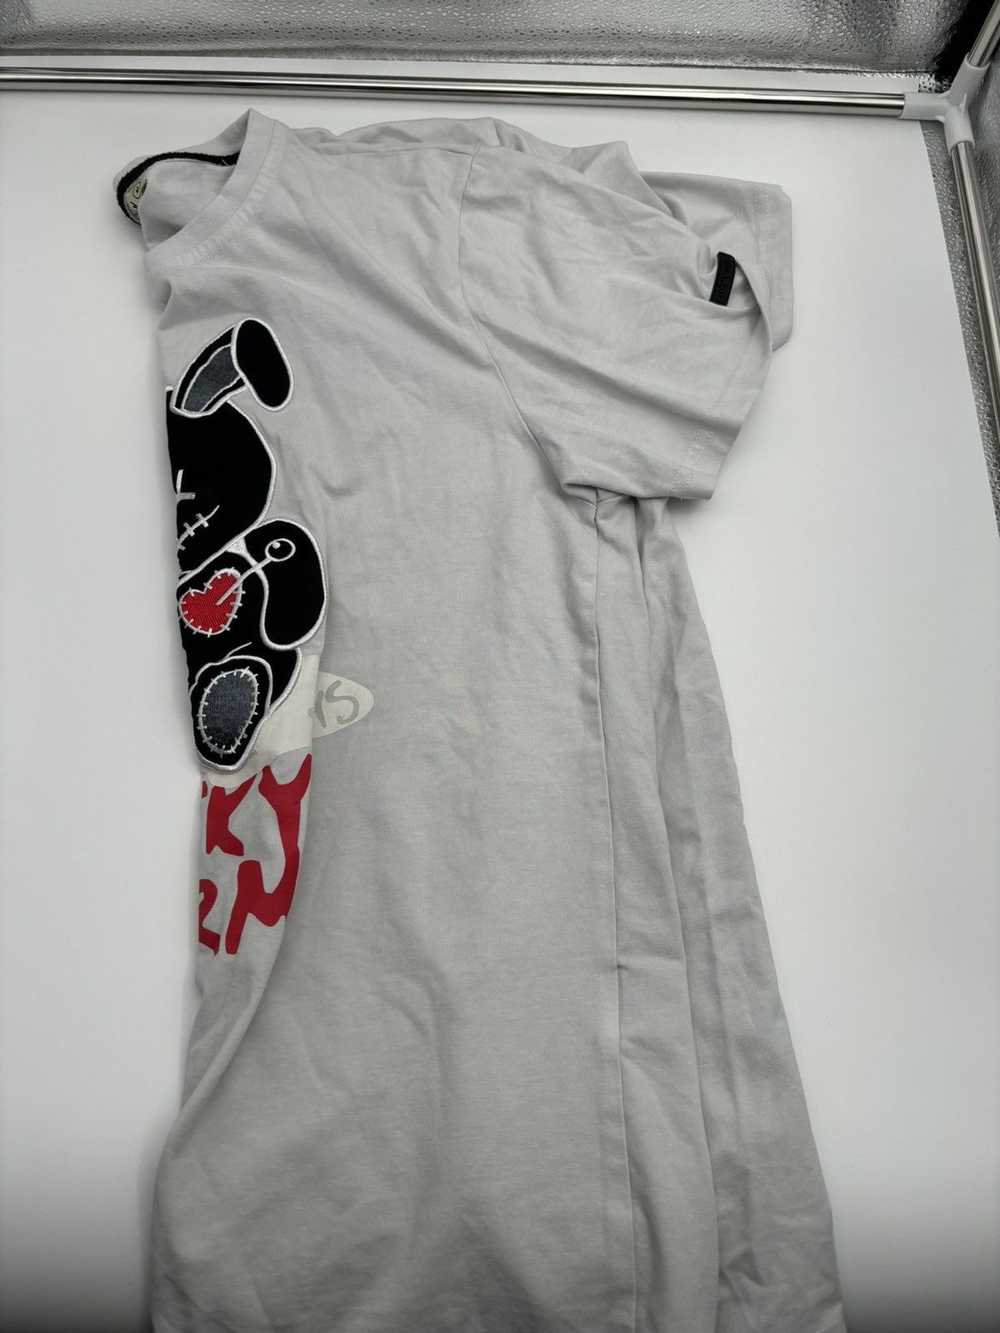 Streetwear × Vintage Lucky charm white t shirt - image 3